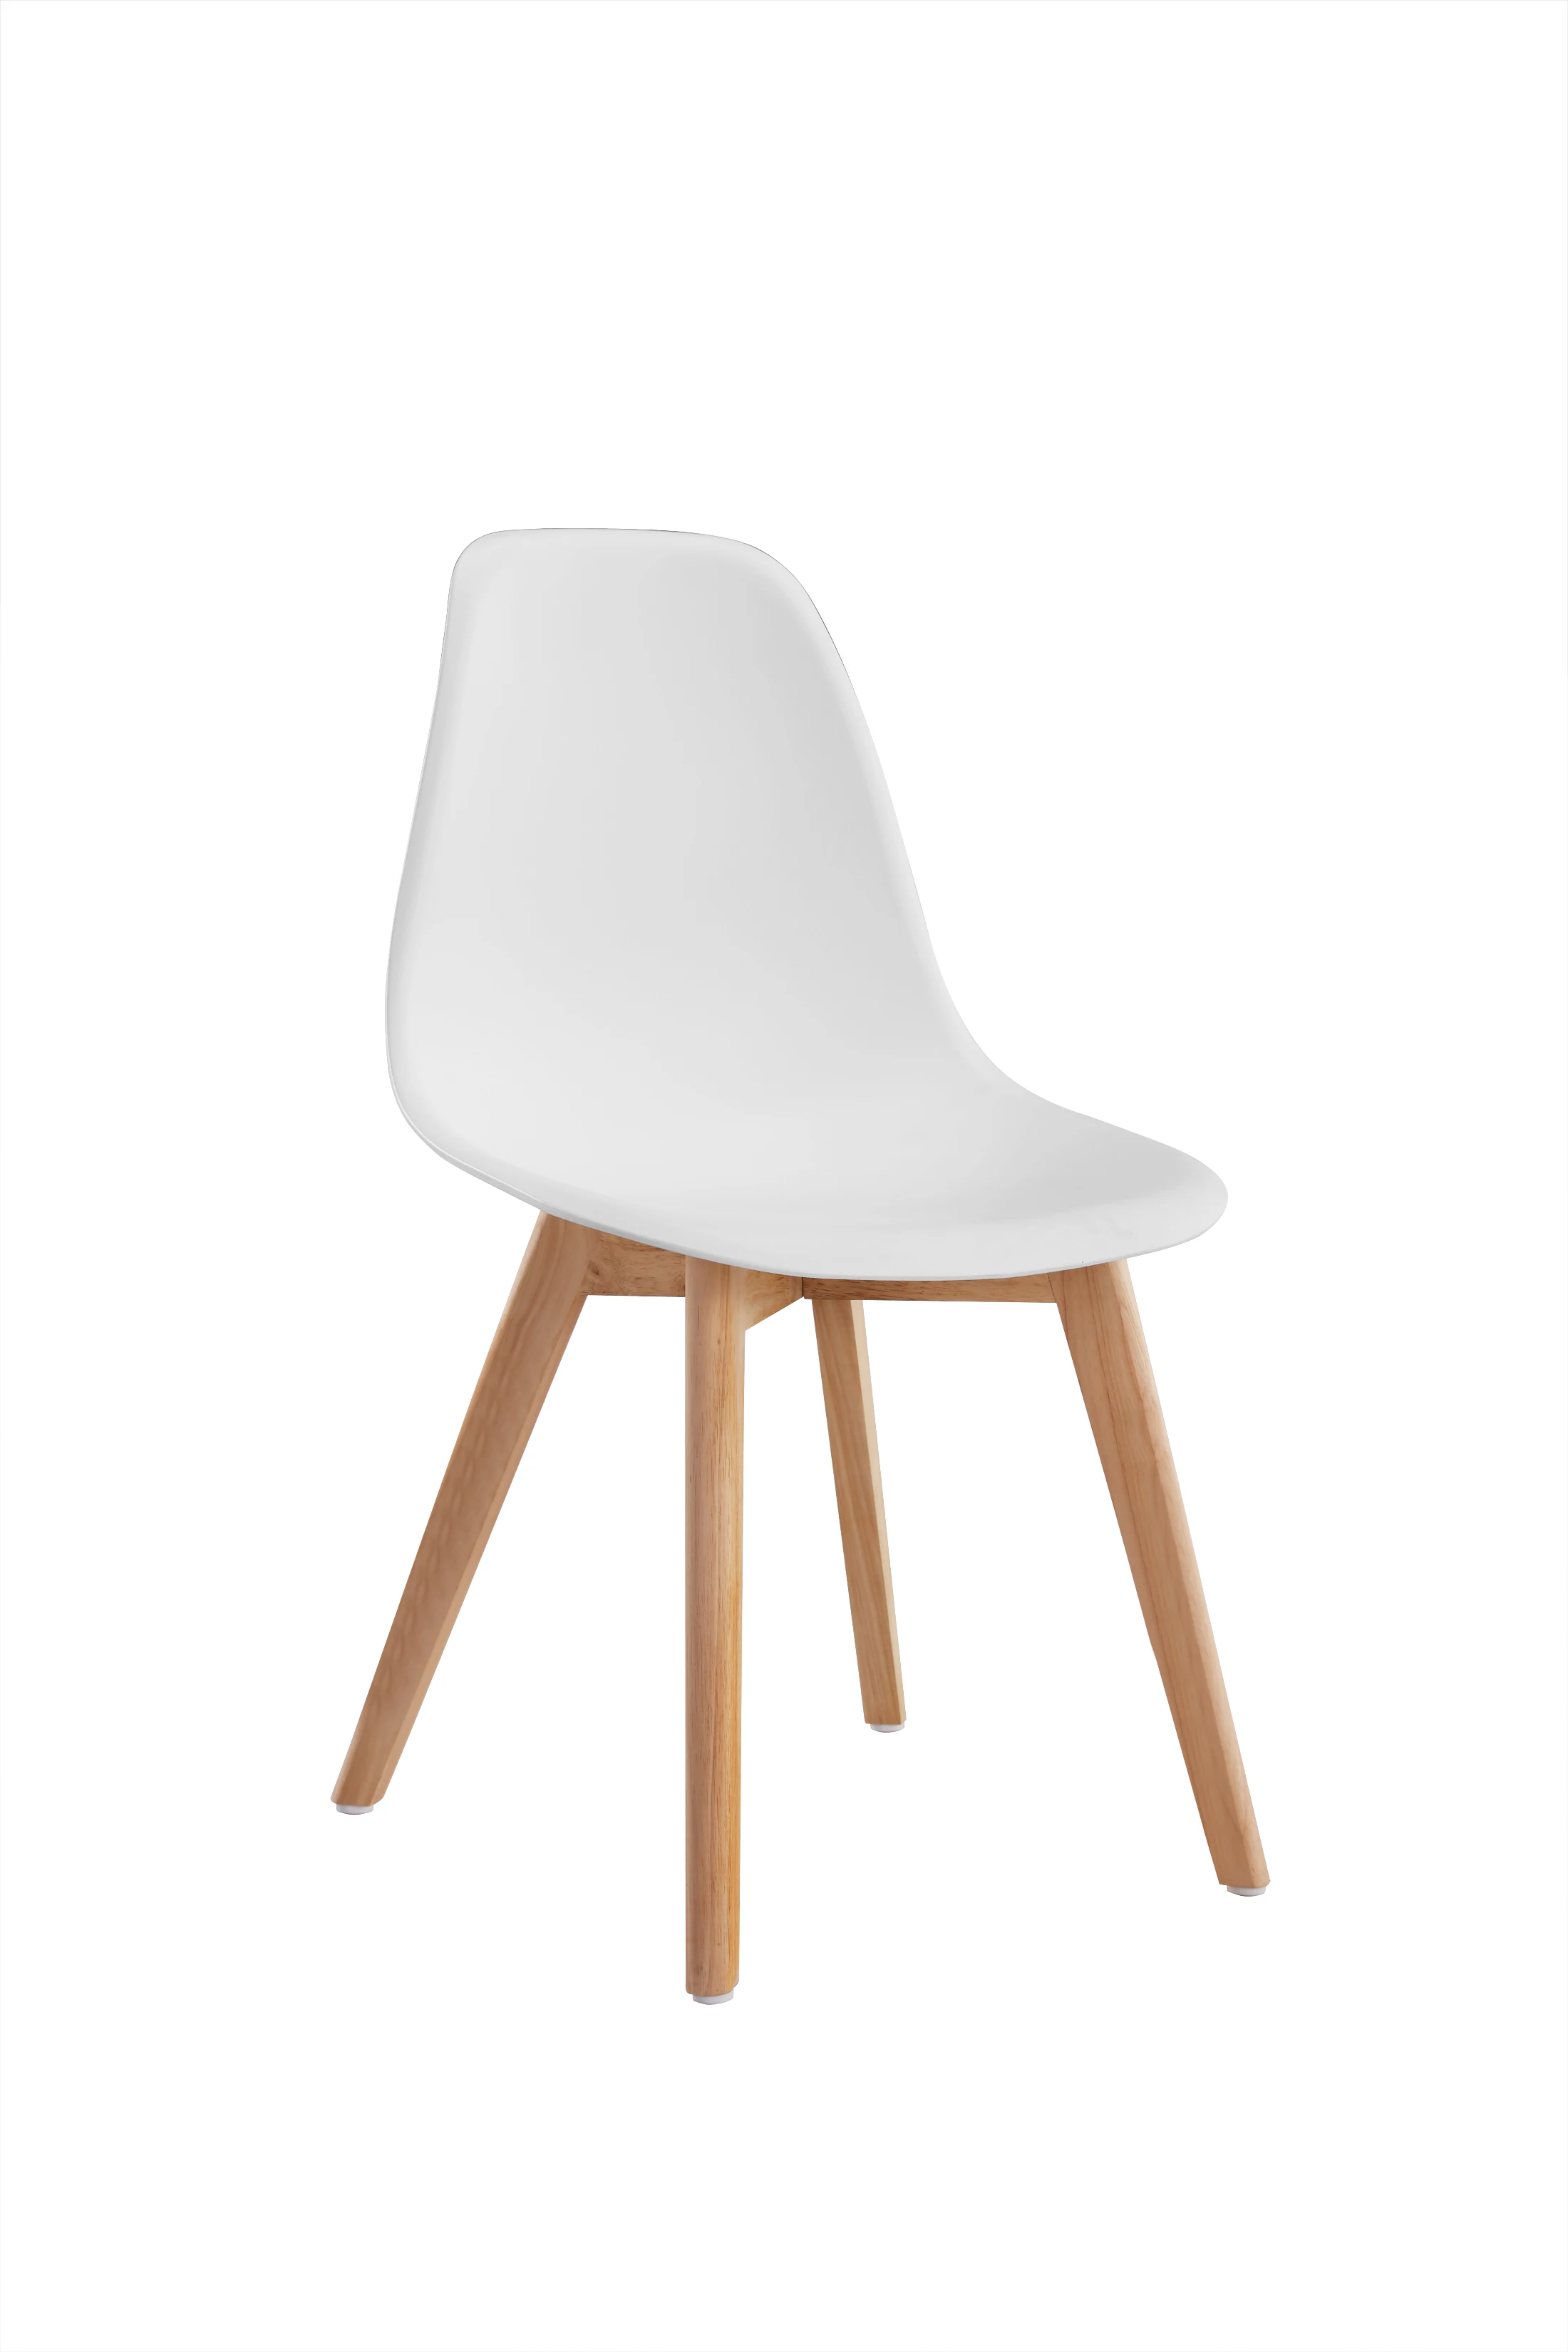 Cheap Modern White Polypropylene Wooden Legs Kitchen Chairs Plastic Dining Chairs Price Buy Cheap Plastic Chair Price Modern Plastic Chair Modern Pp Dining Chair Product On Alibaba Com